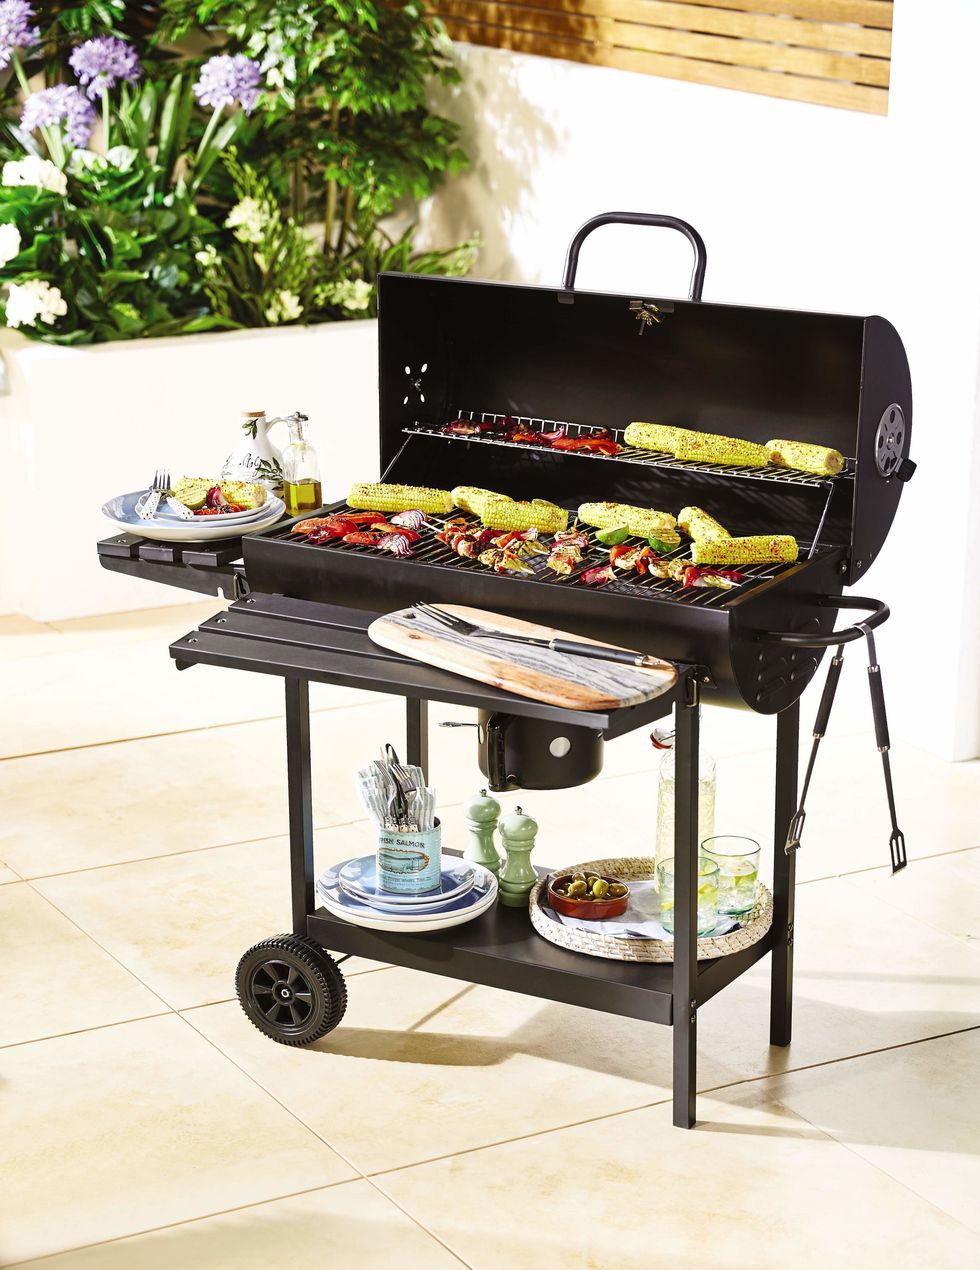 Oil Drum Charcoal Barbecue - Aldi Gardening Event Week